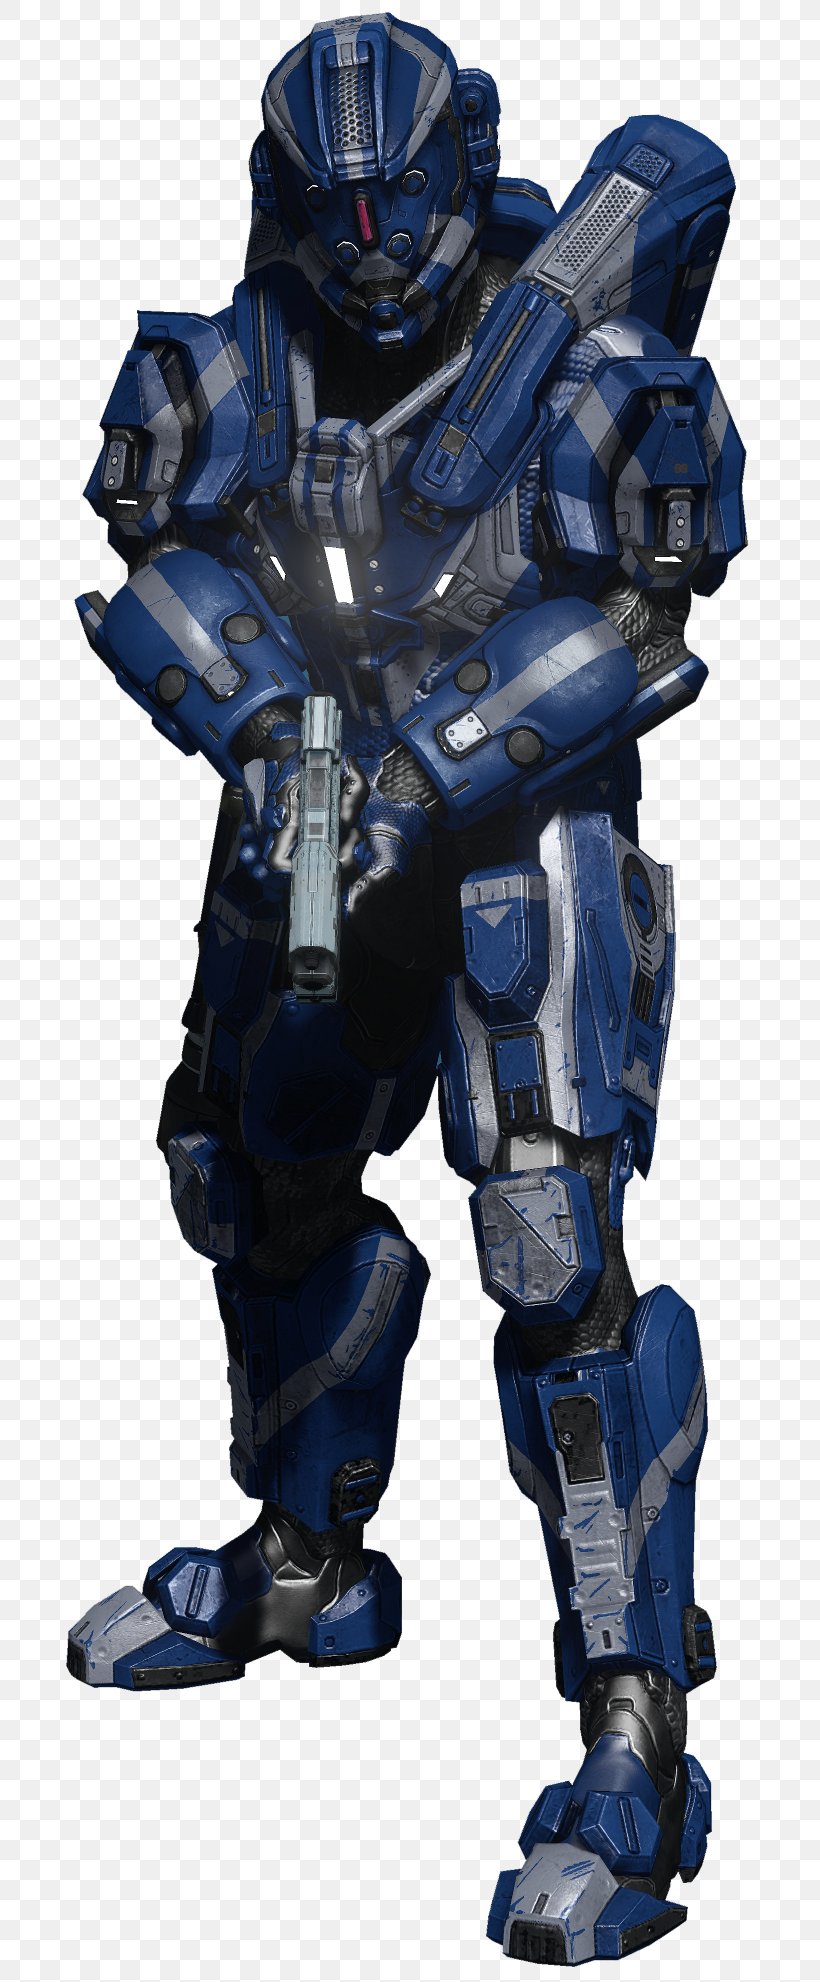 Halo 4 Halo 5: Guardians Video Game Mod Spartan, PNG, 705x1982px, 343 Industries, Halo 4, Action Figure, Armour, Bungie Download Free